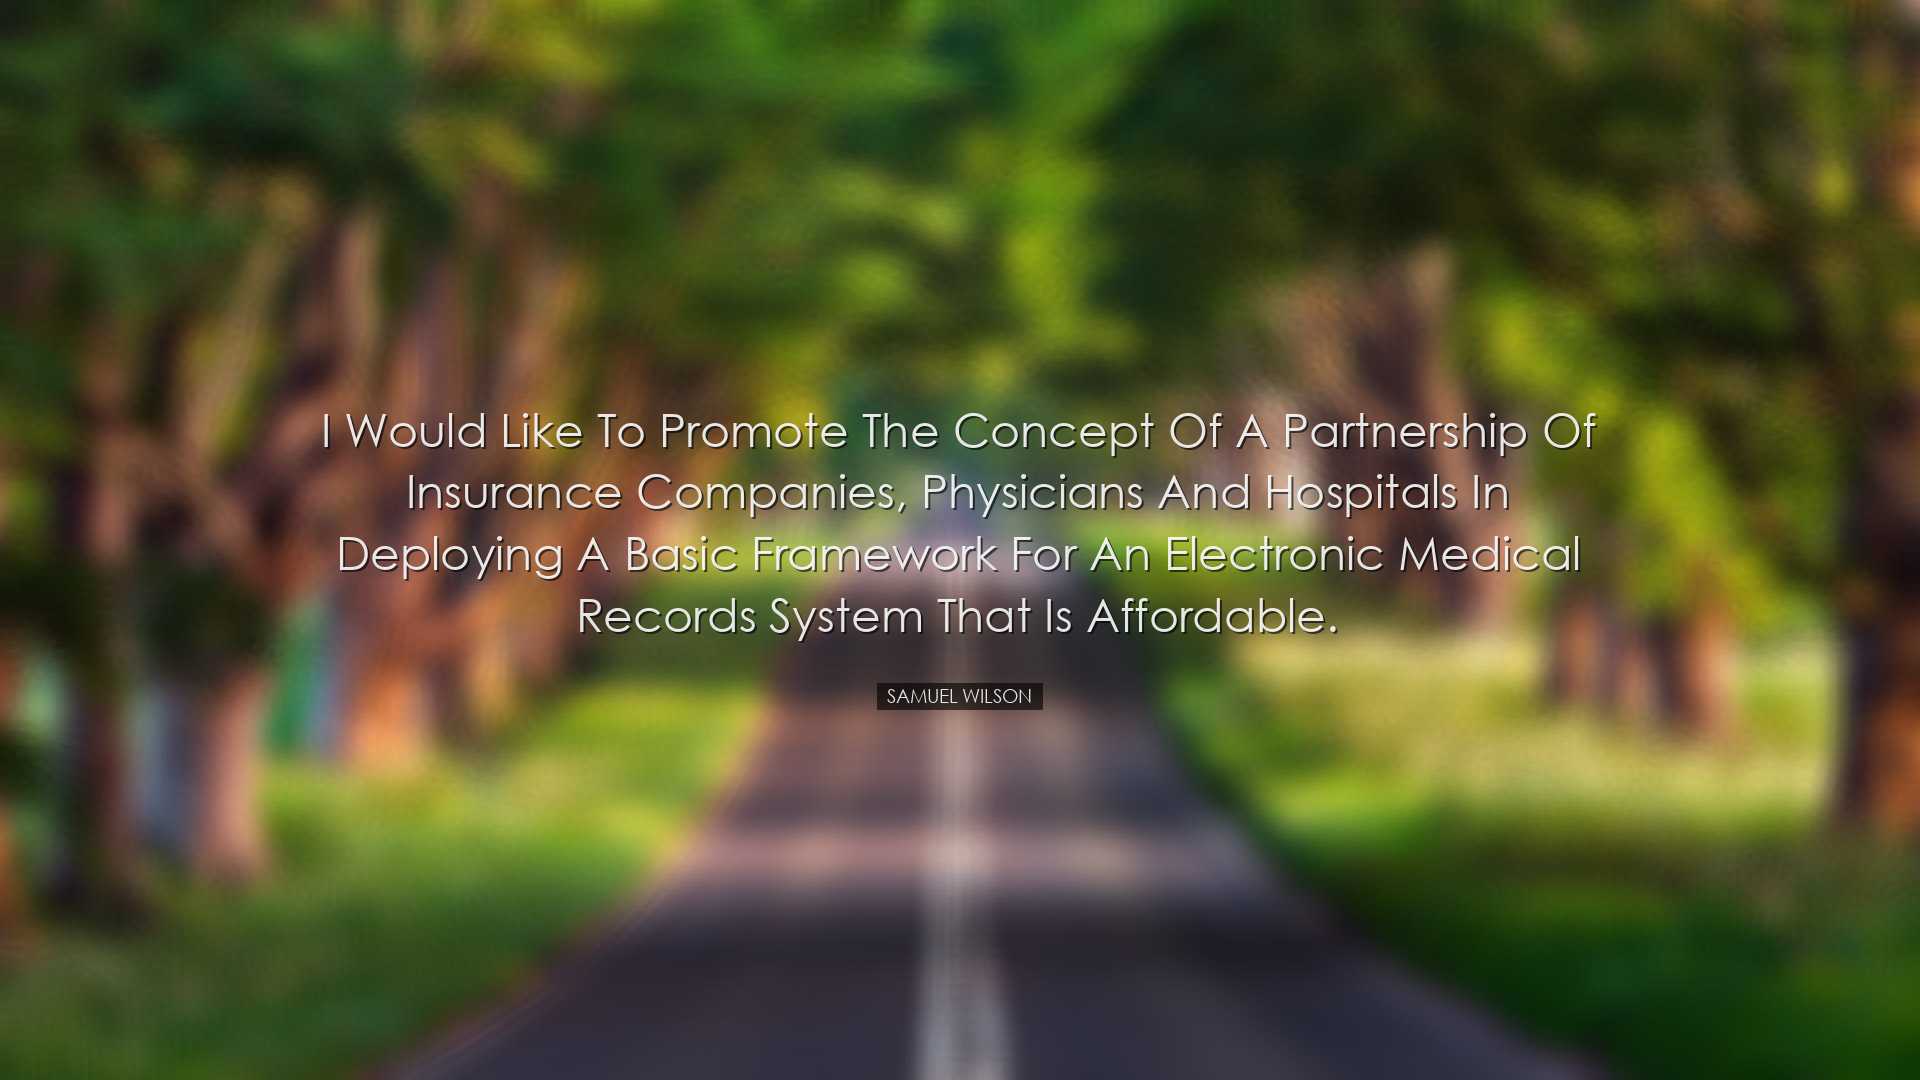 I would like to promote the concept of a partnership of insurance